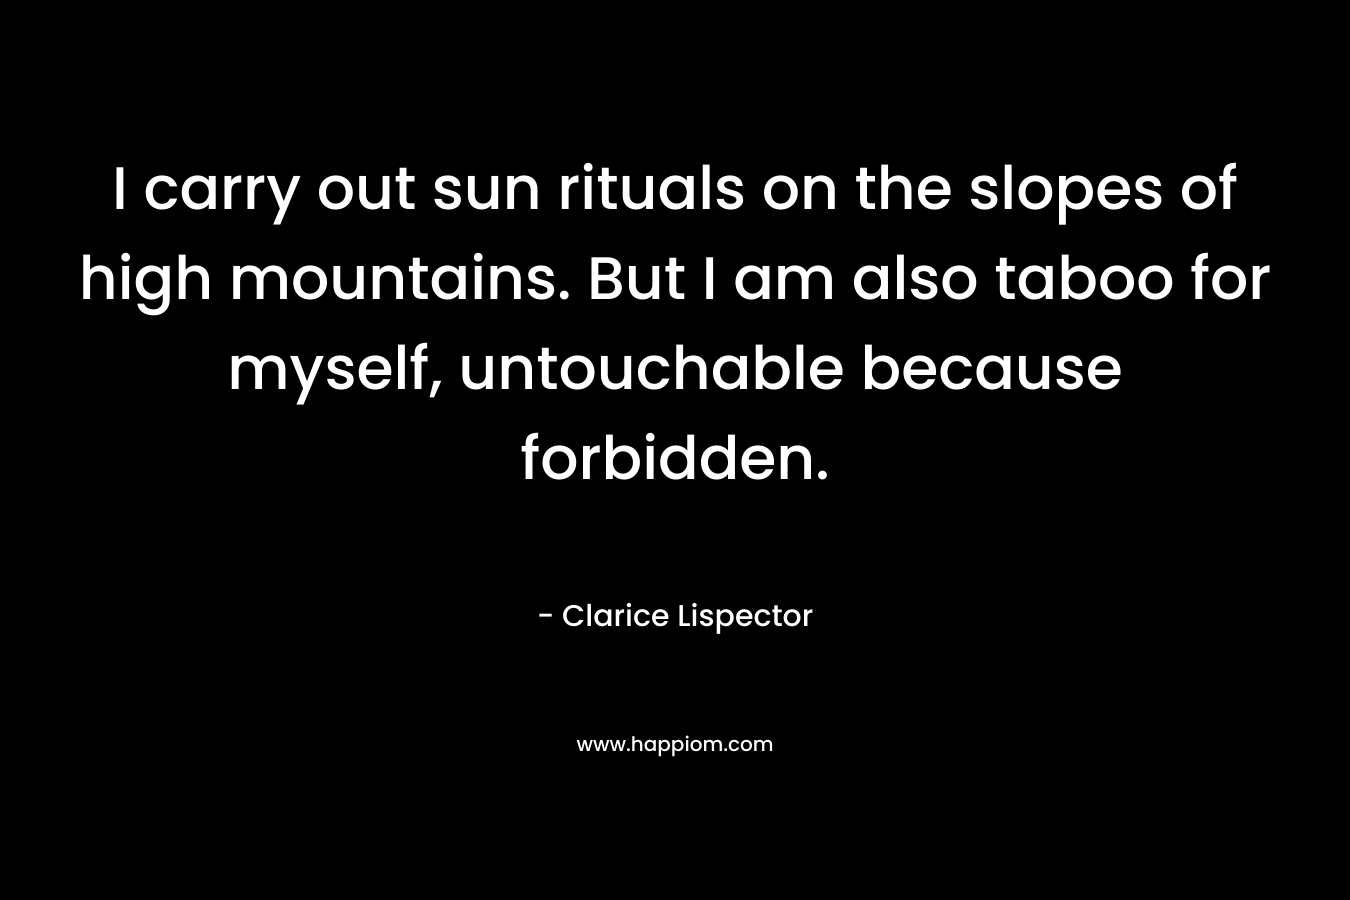 I carry out sun rituals on the slopes of high mountains. But I am also taboo for myself, untouchable because forbidden.